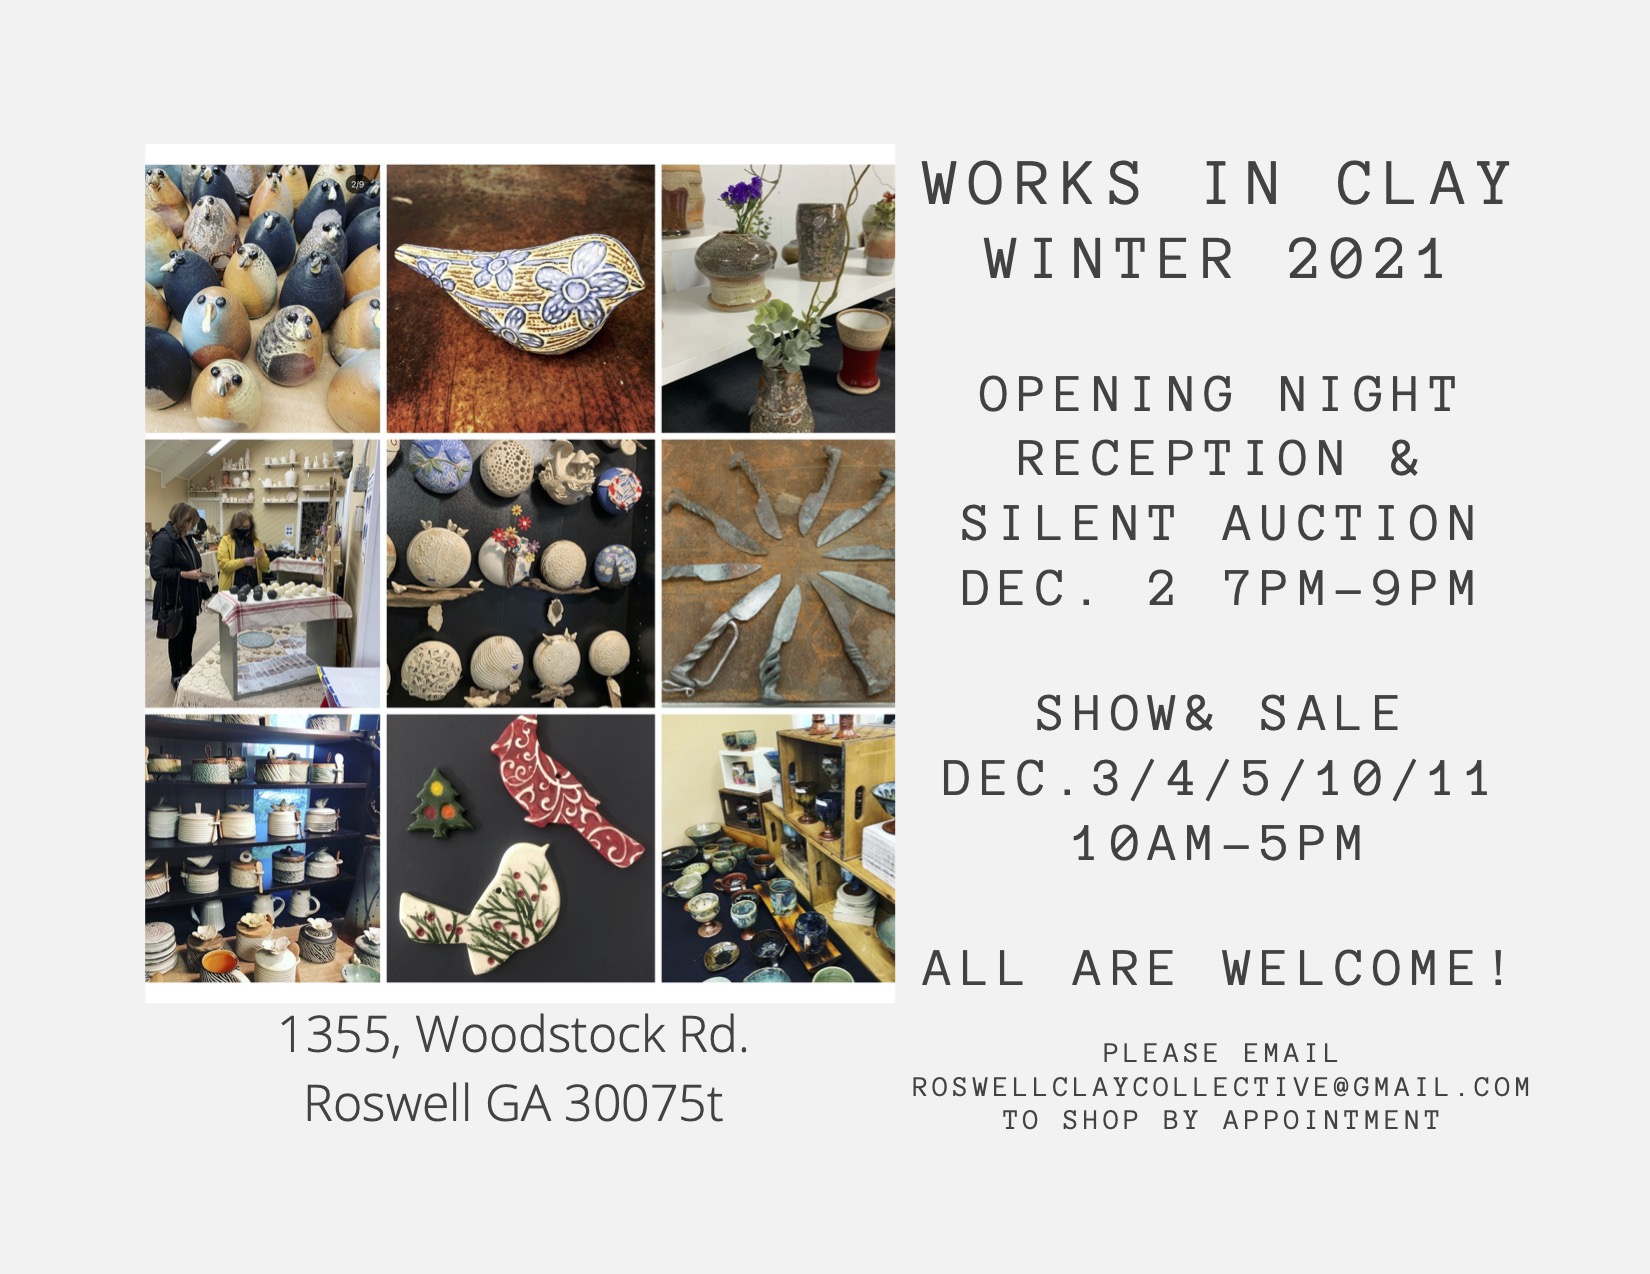 Works in Clay Winter 2021 Show and Sale